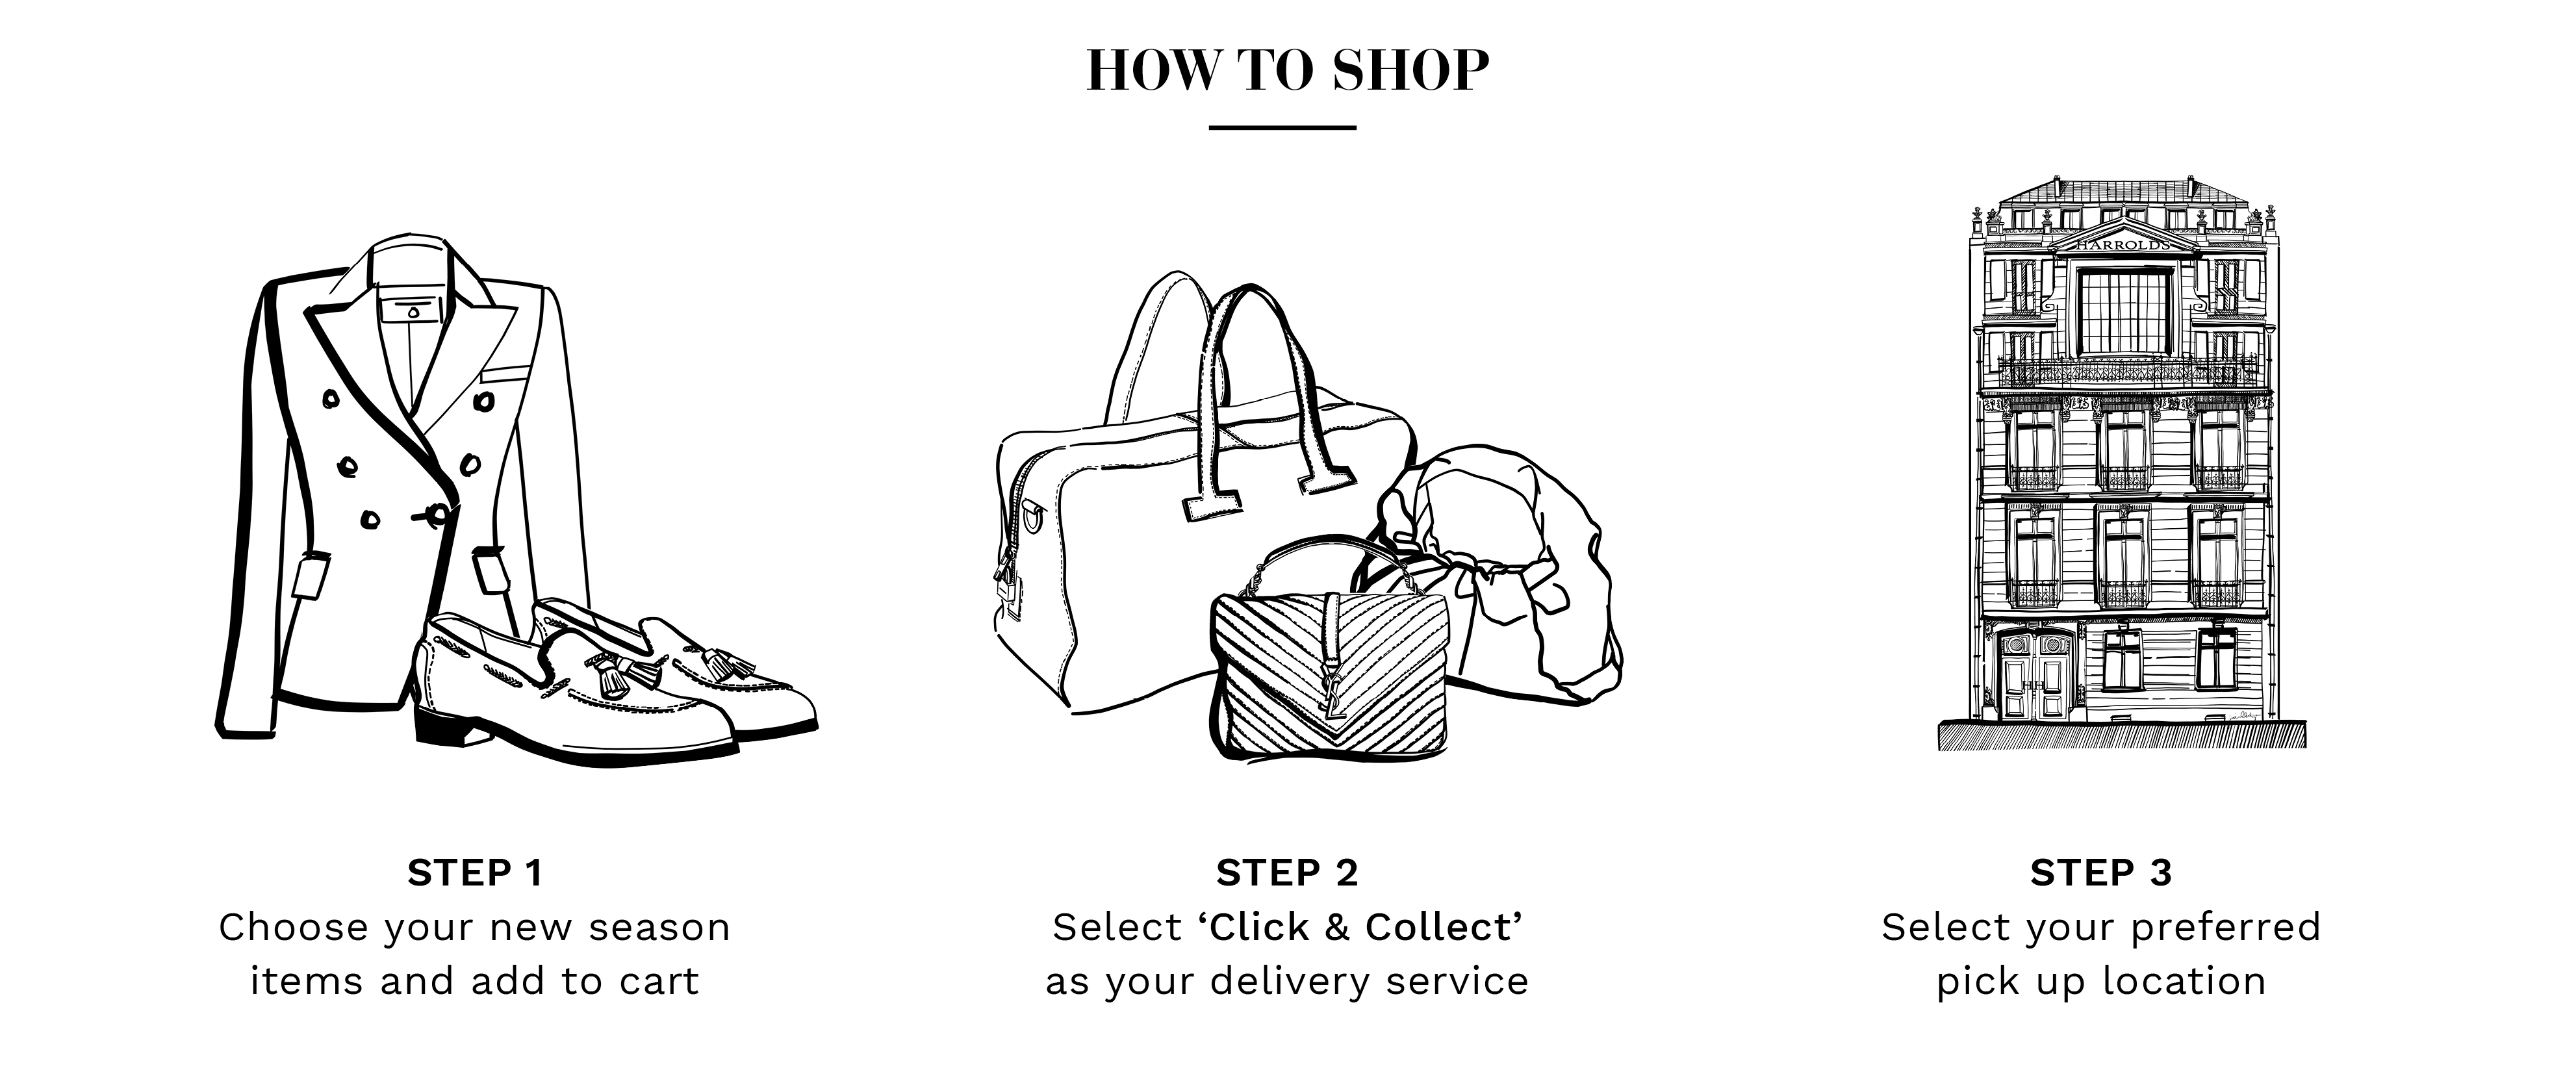 HOW TO SHOP